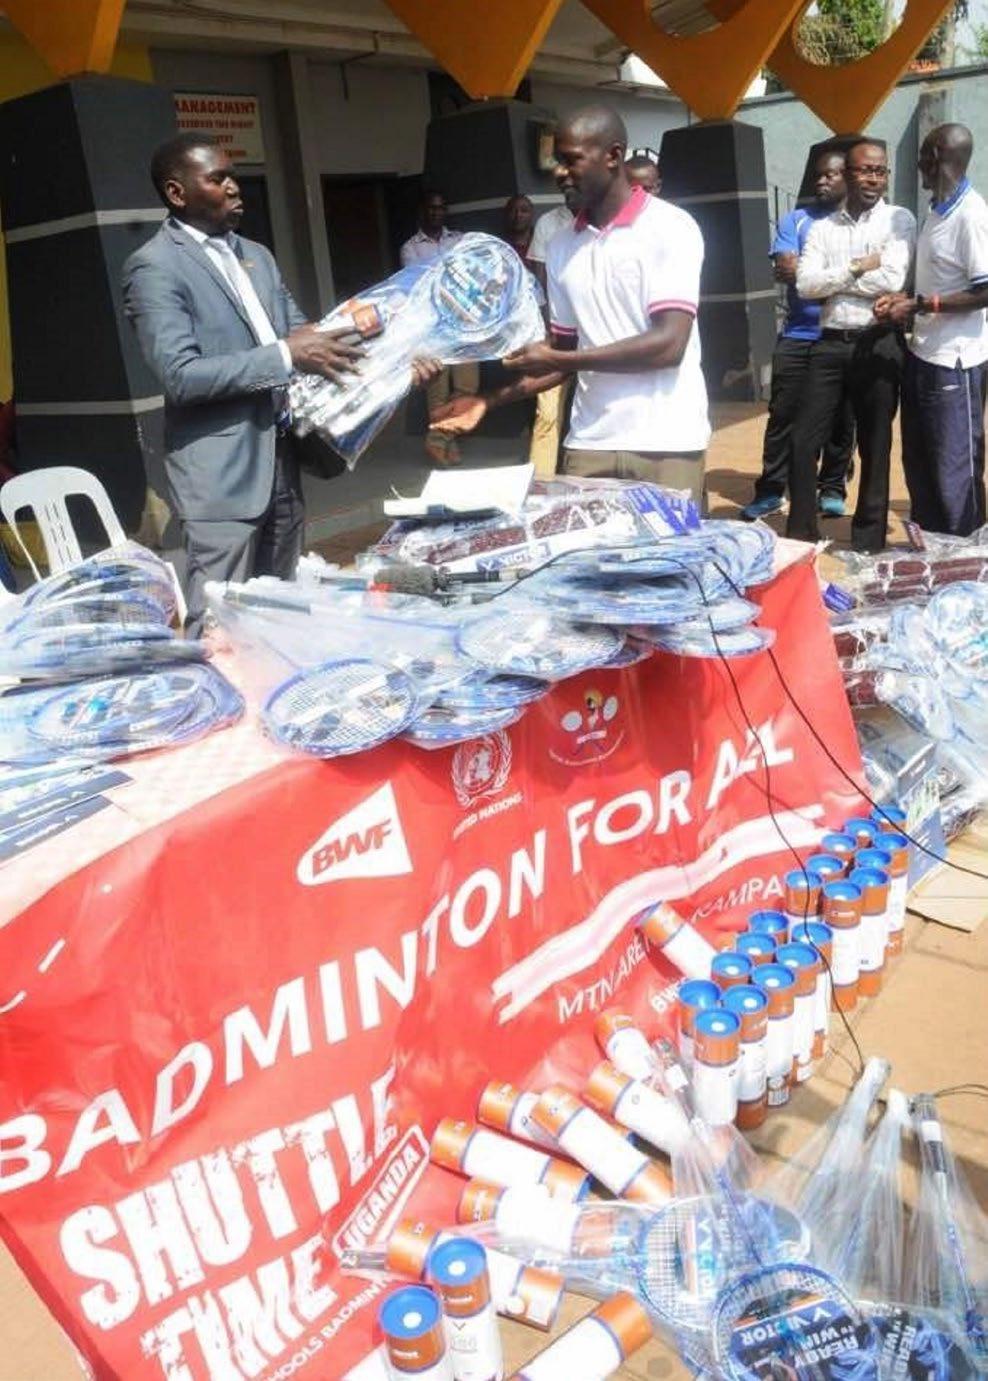 PAGE 10 BADMINTON FOR ALL REACHES THOUSANDS More than 60,500 youth in Africa, including nearly 9,000 with disabilities, were introduced to badminton during last year s Badminton for All project